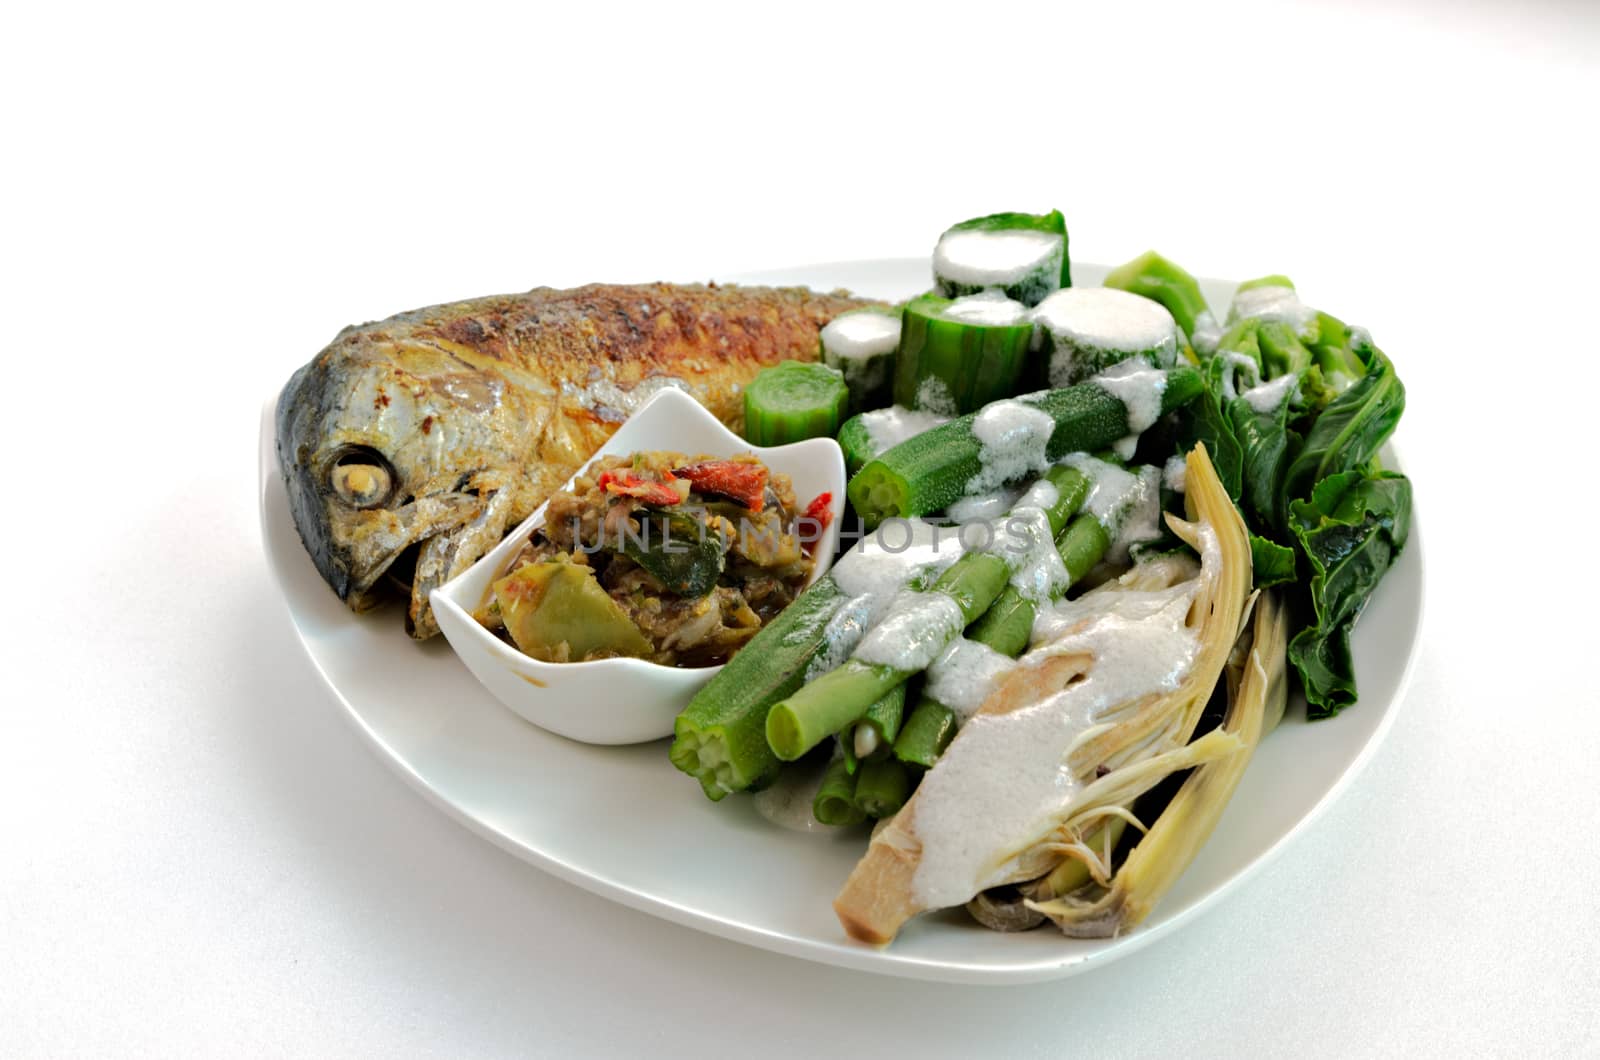 Fired mackerel with chili paste and steam vegetable